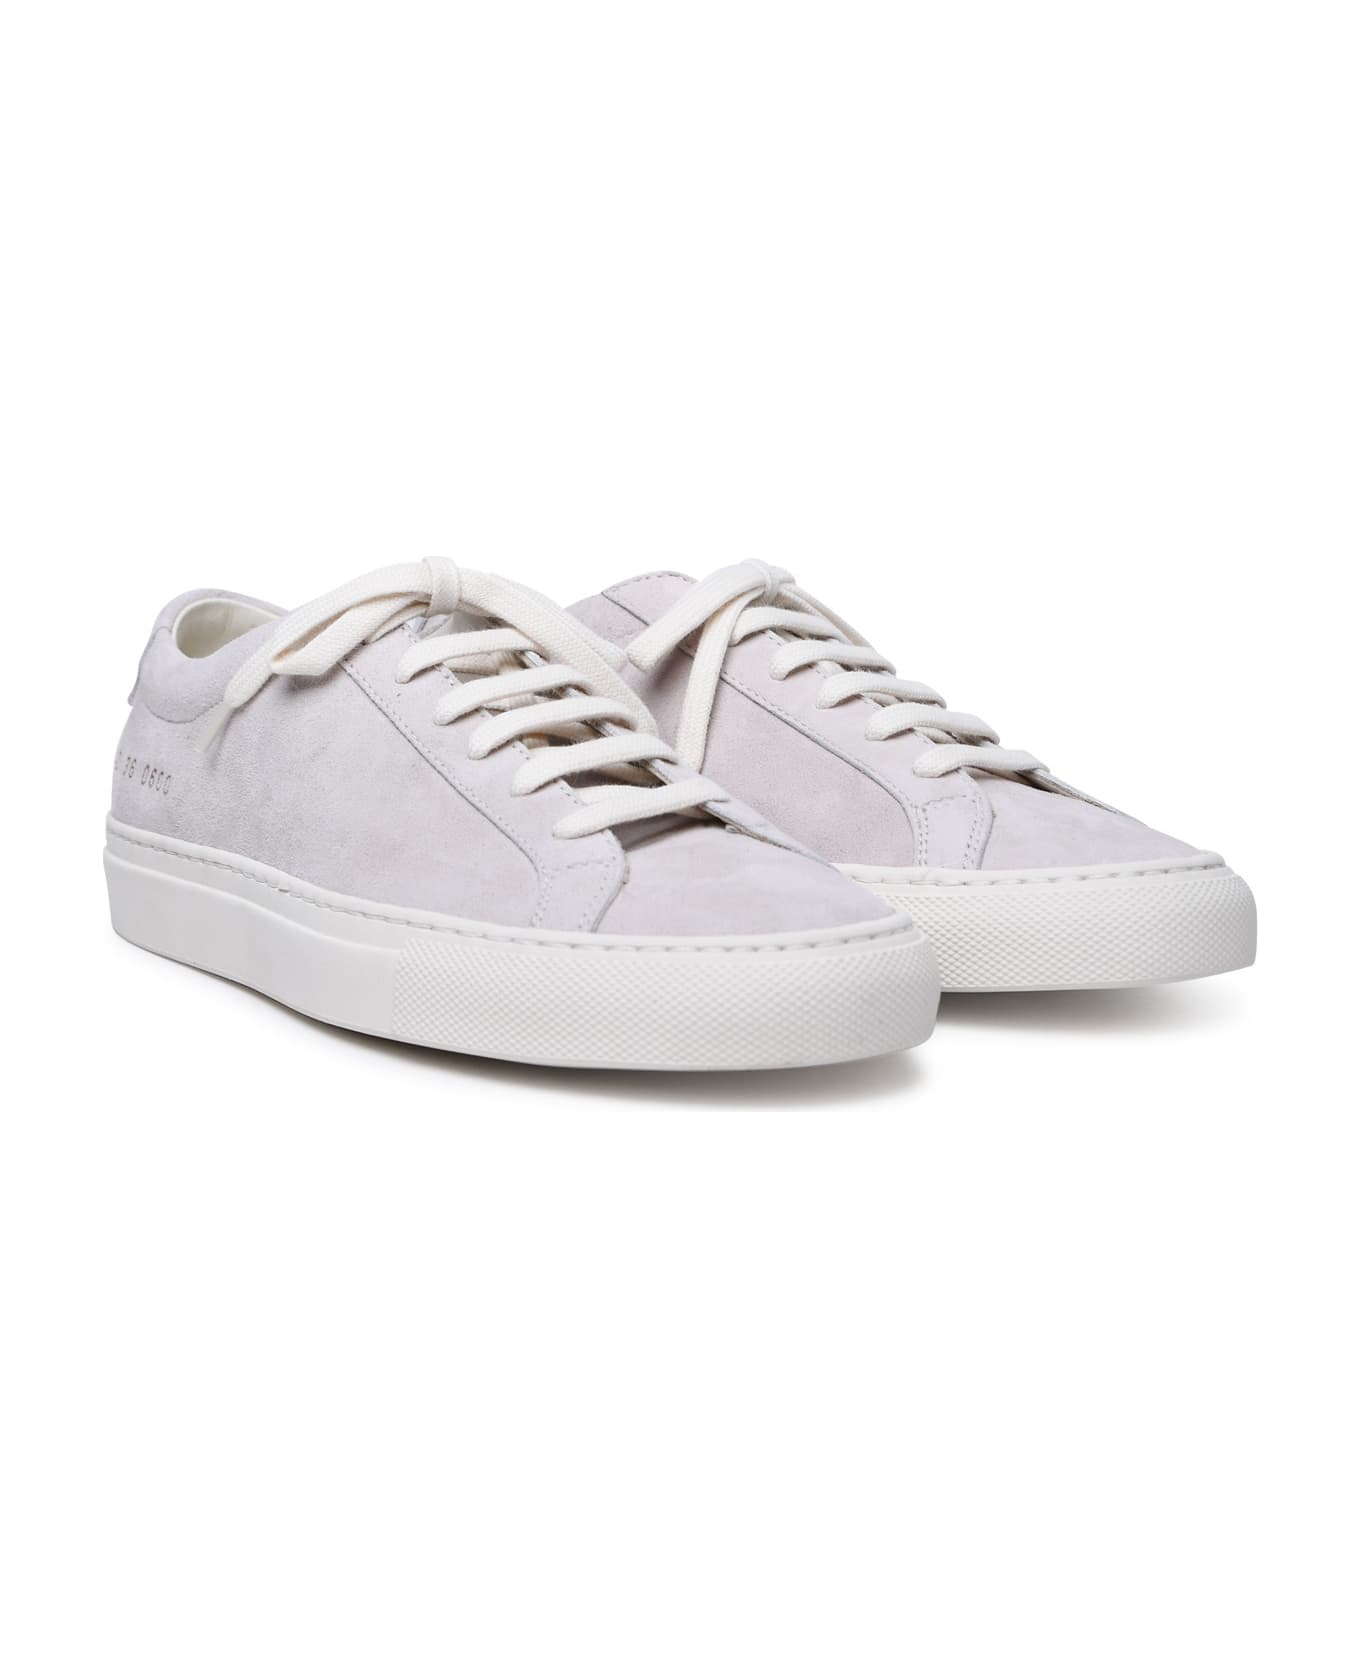 Common Projects Achilles Low Sneakers - Nude スニーカー